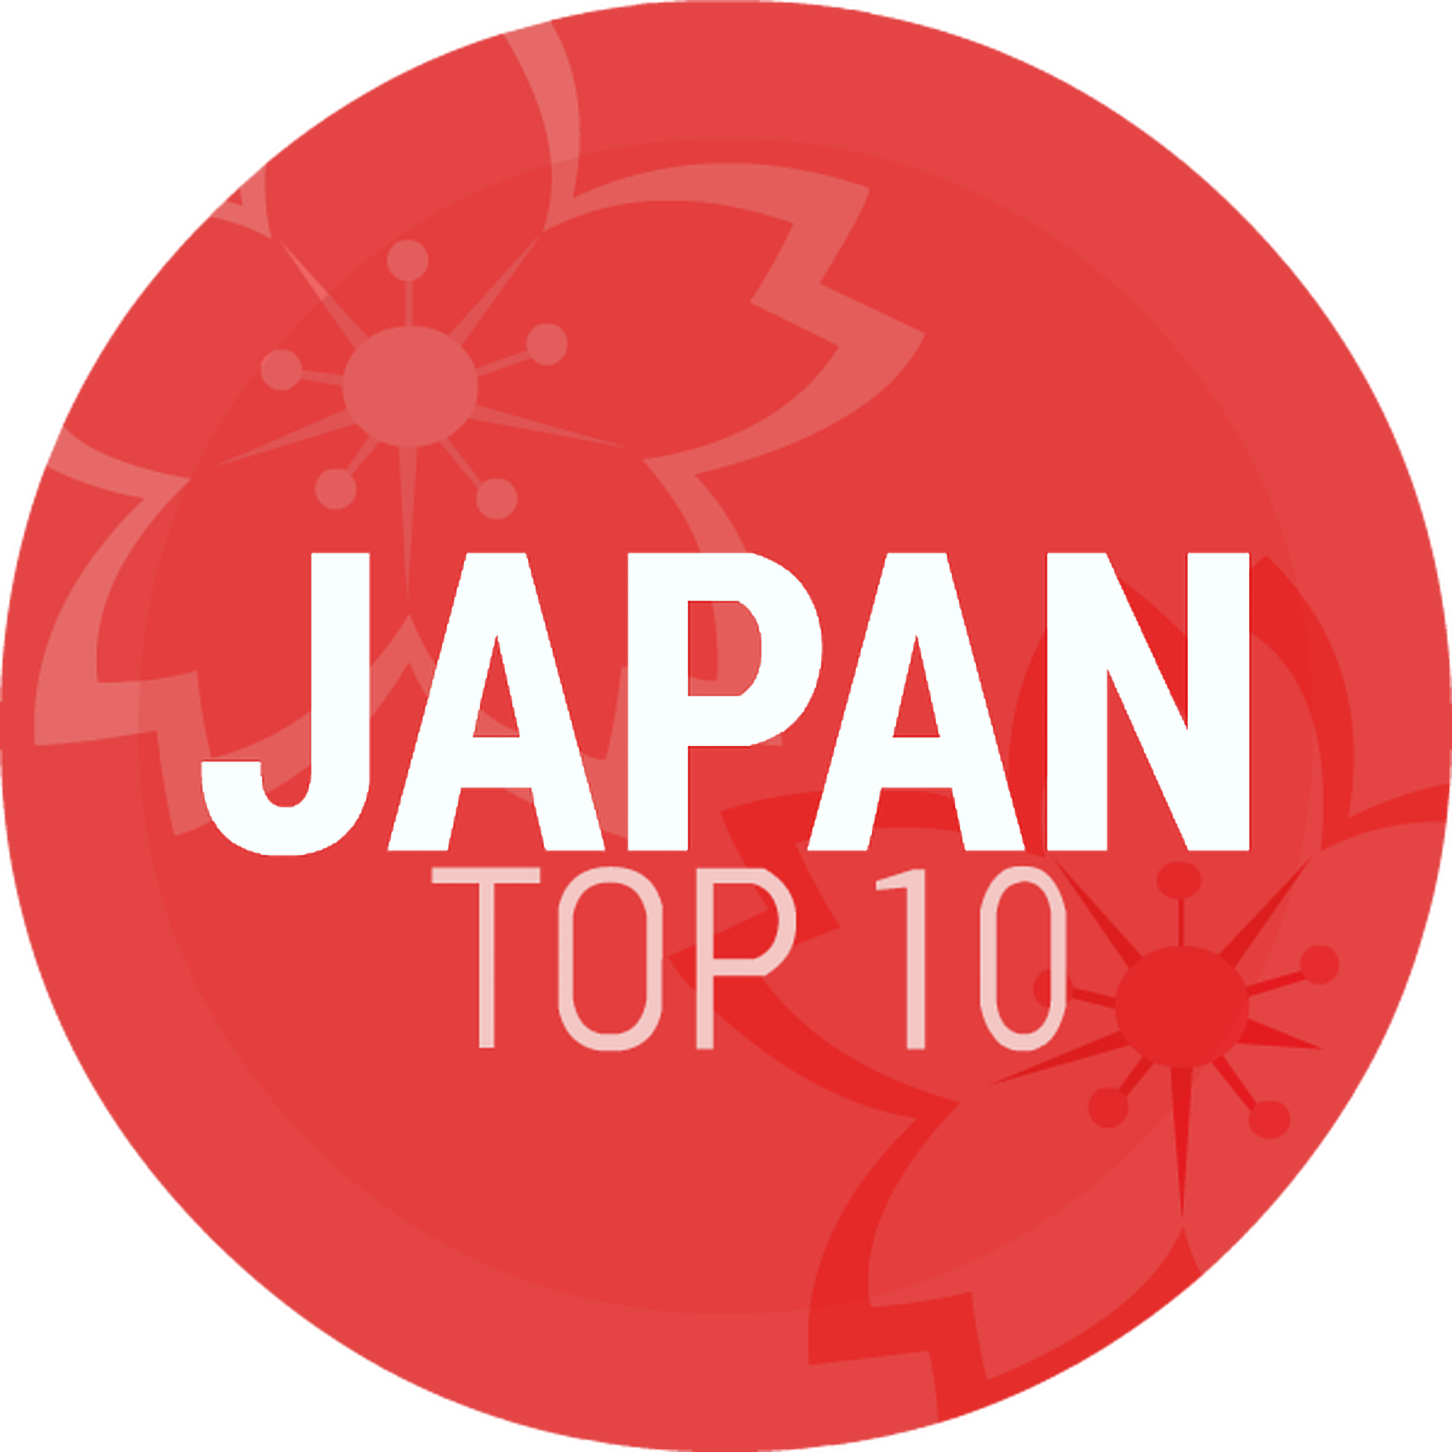 Episode 290: Japan Top 10 Late July 2019 Countdown